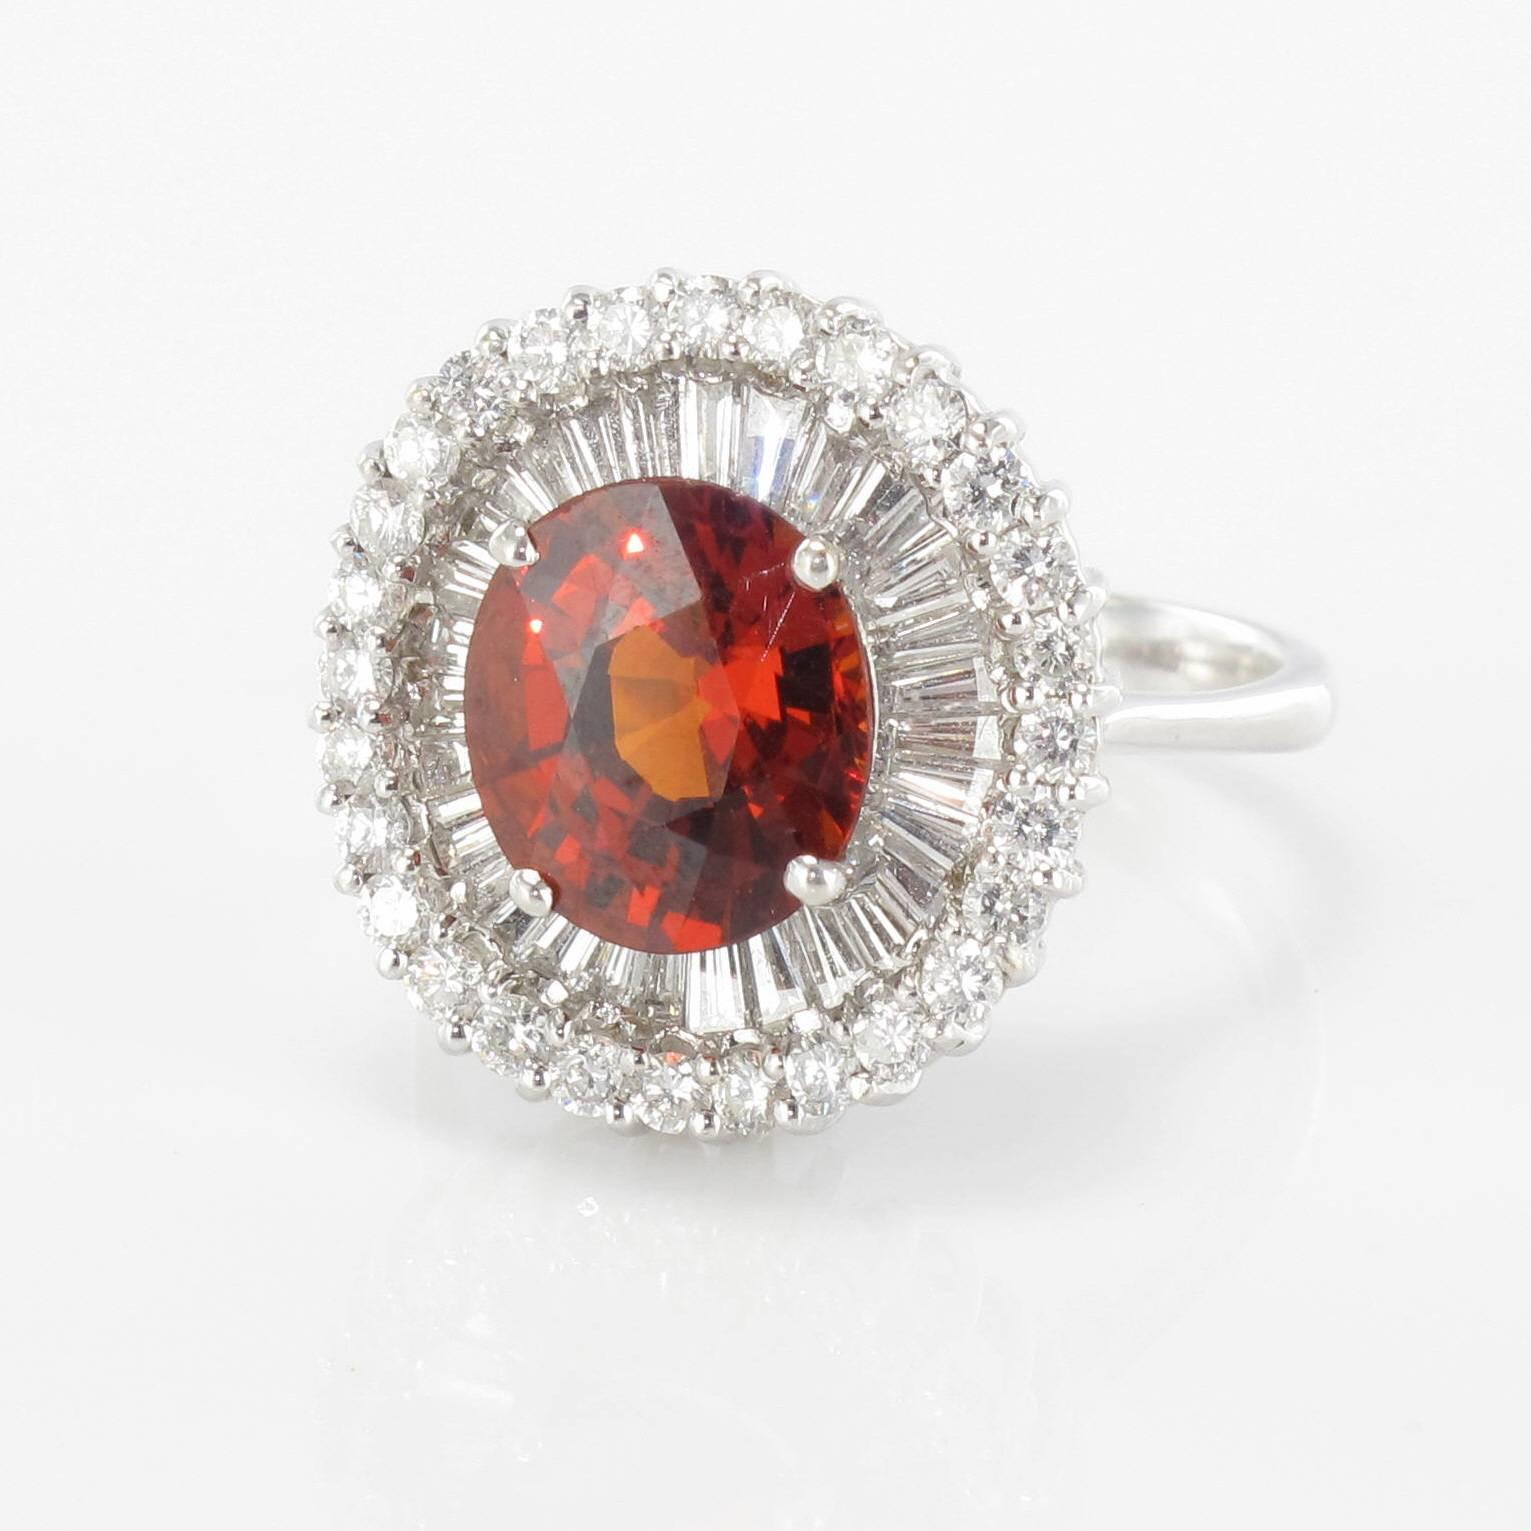 Ring in 18 carat white gold, eagle head hallmark. 

Splendid white gold ring featuring an orange spessartine garnet set with 4 claws in the centre encircled by baguette cut diamonds and brilliant cut diamonds. 

Garnet Weight: 4.05 carat approx